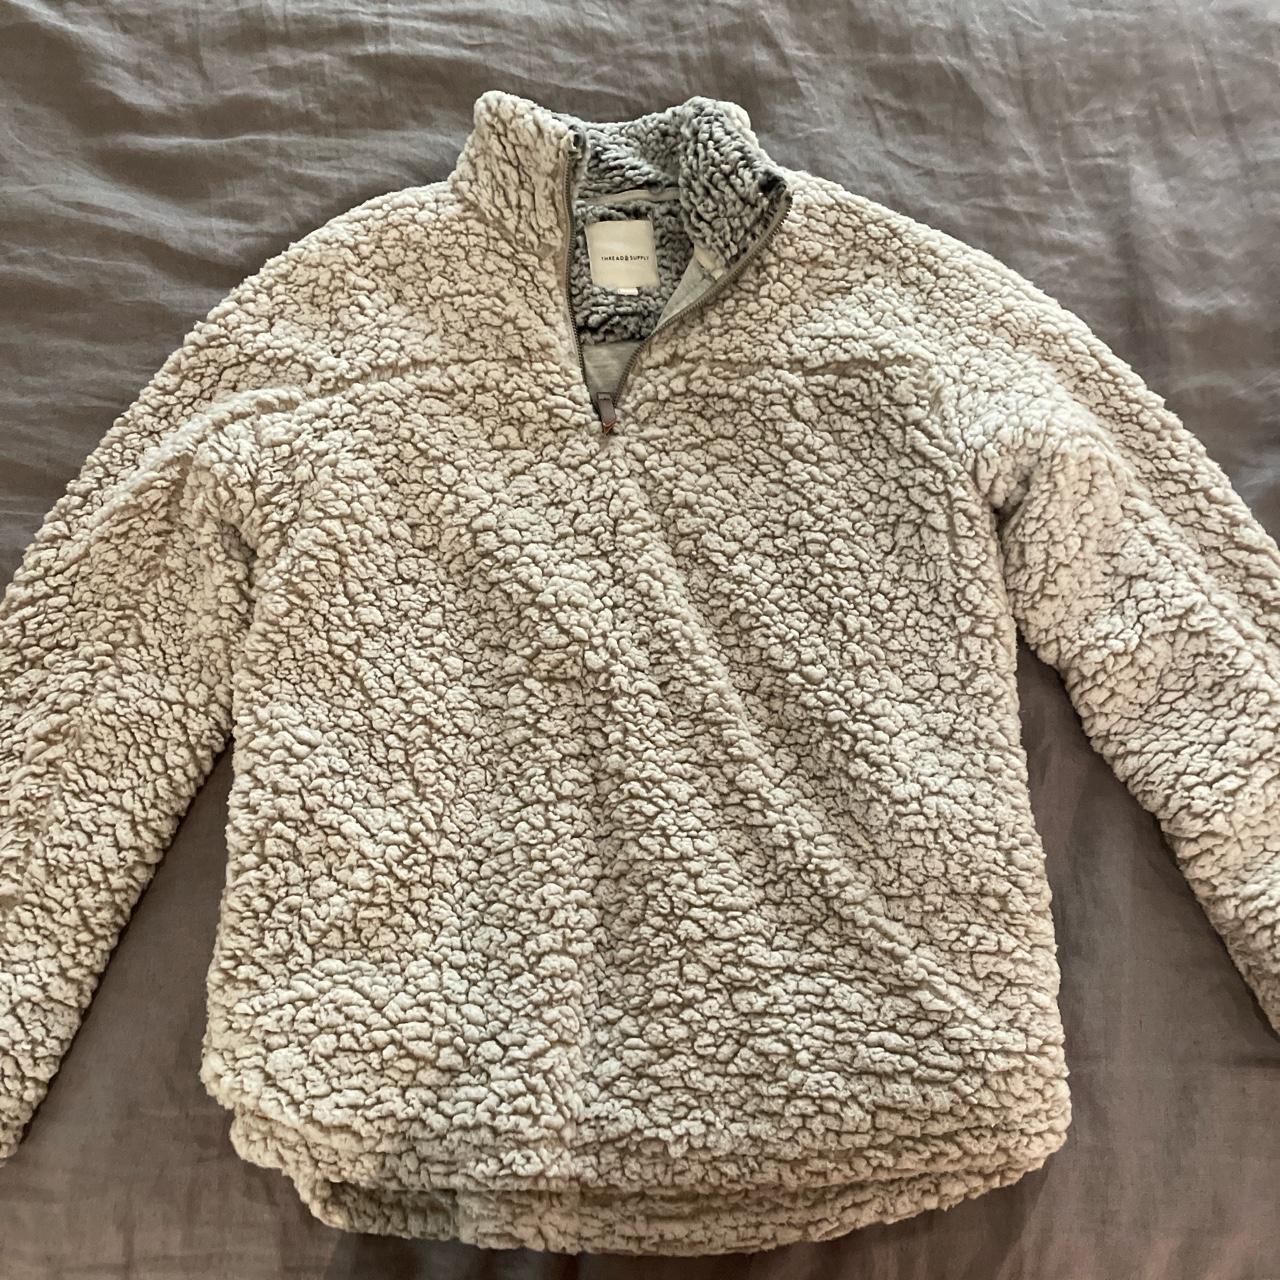 Thread and Supply Fuzzy Jacket, size small - Depop